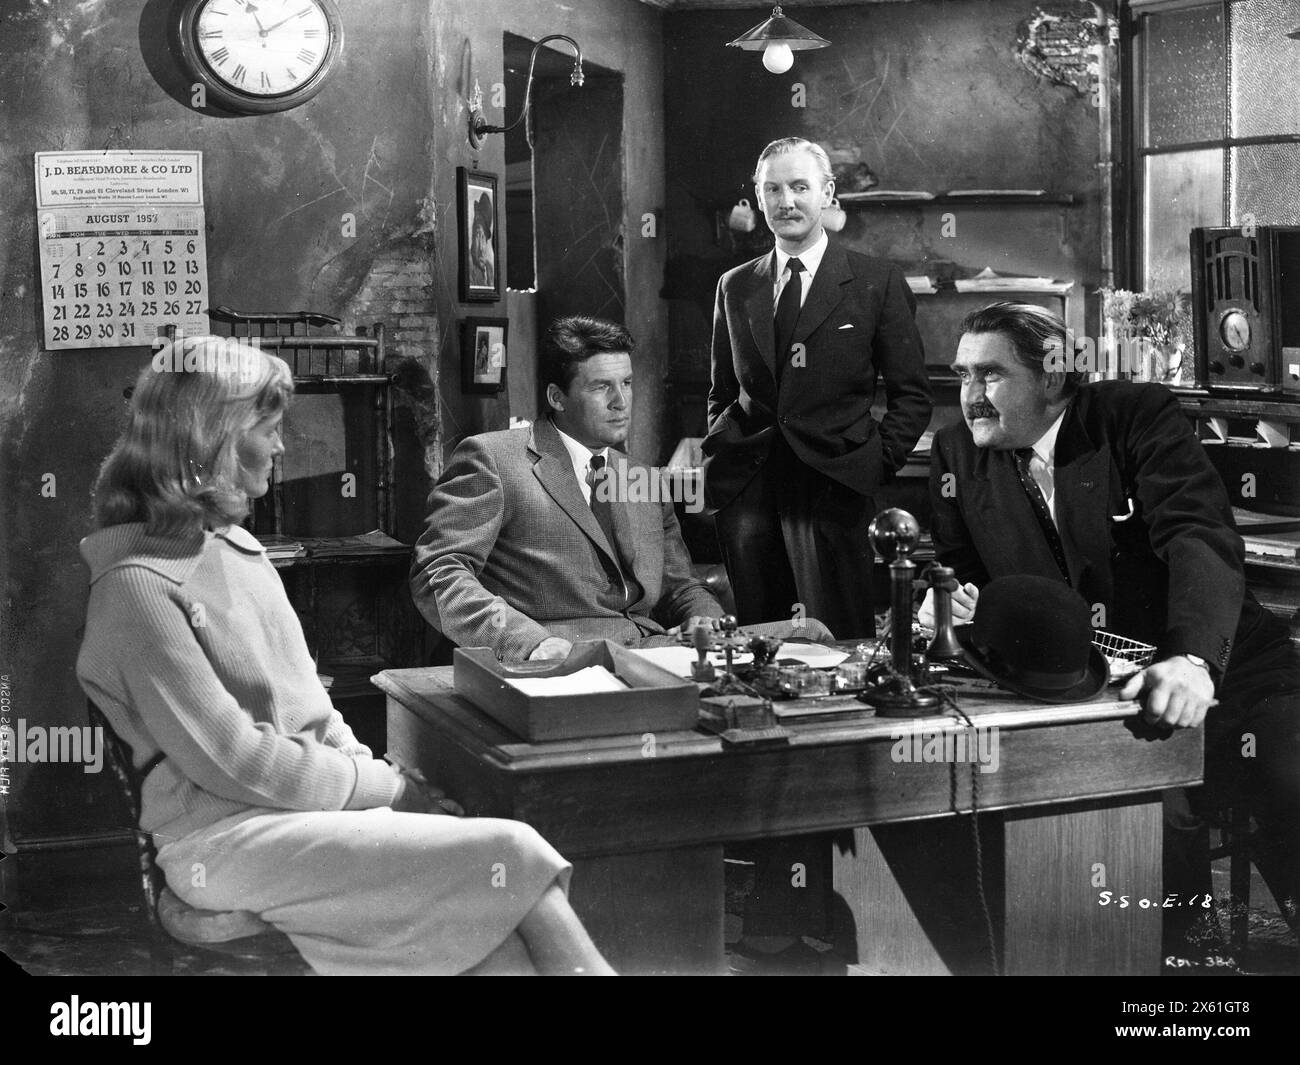 VIRGINIA McKENNA, BILL TRAVERS, LESLIE PHILLIPS and FRANCIS de WOLFF in a  scene from THE SMALLEST SHOW ON EARTH 1957 Director BASIL DEARDEN Story WILLIAM ROSE Music WILLIAM ALLWYN  Make Up Artist HARRY FRAMPTON Hallmark Productions / British Lion Stock Photo